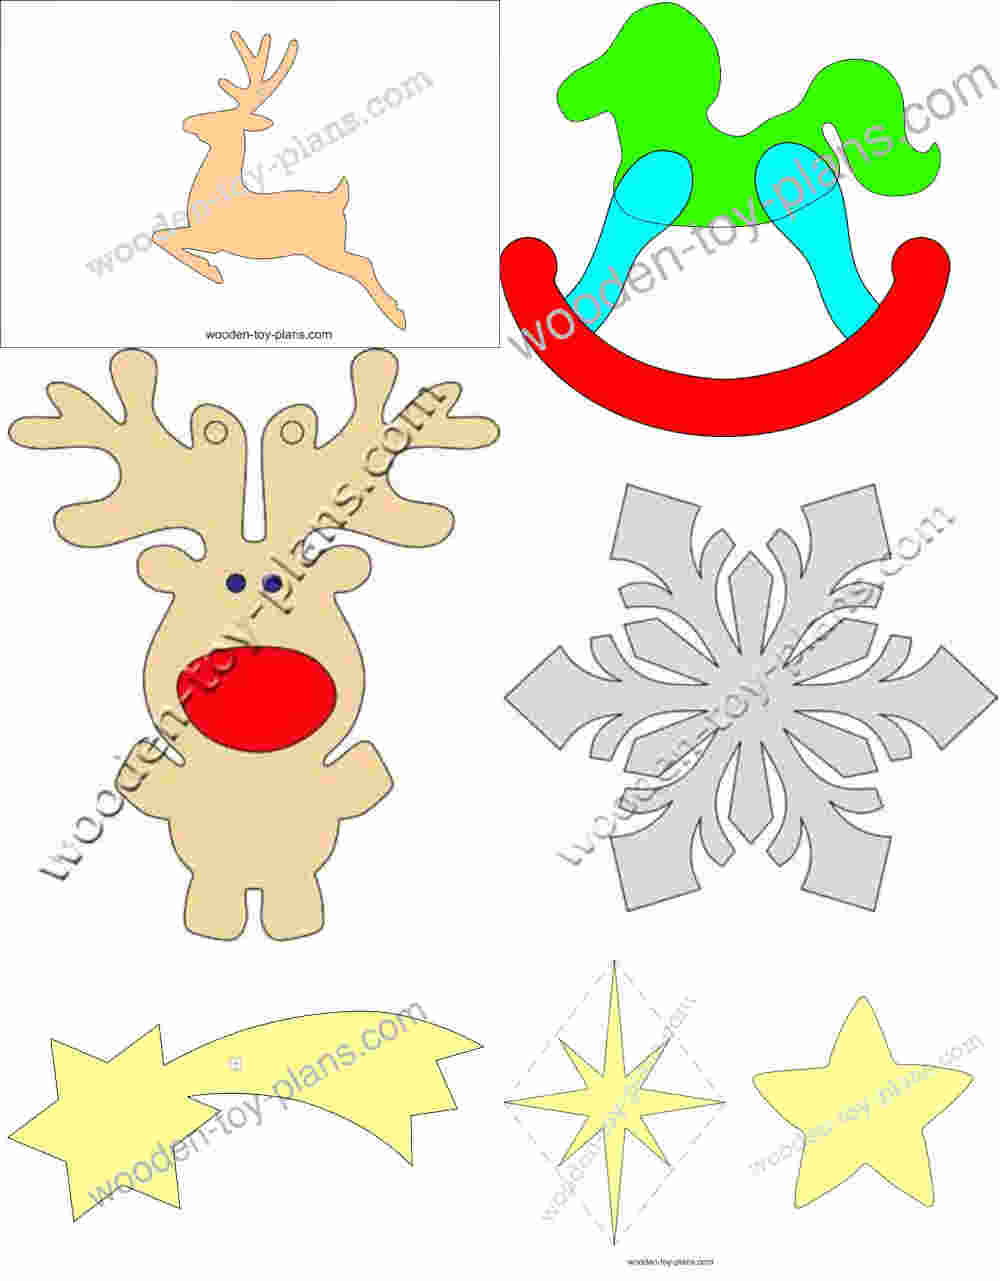 Simple Christmas scroll saw patterns free printable for beginners